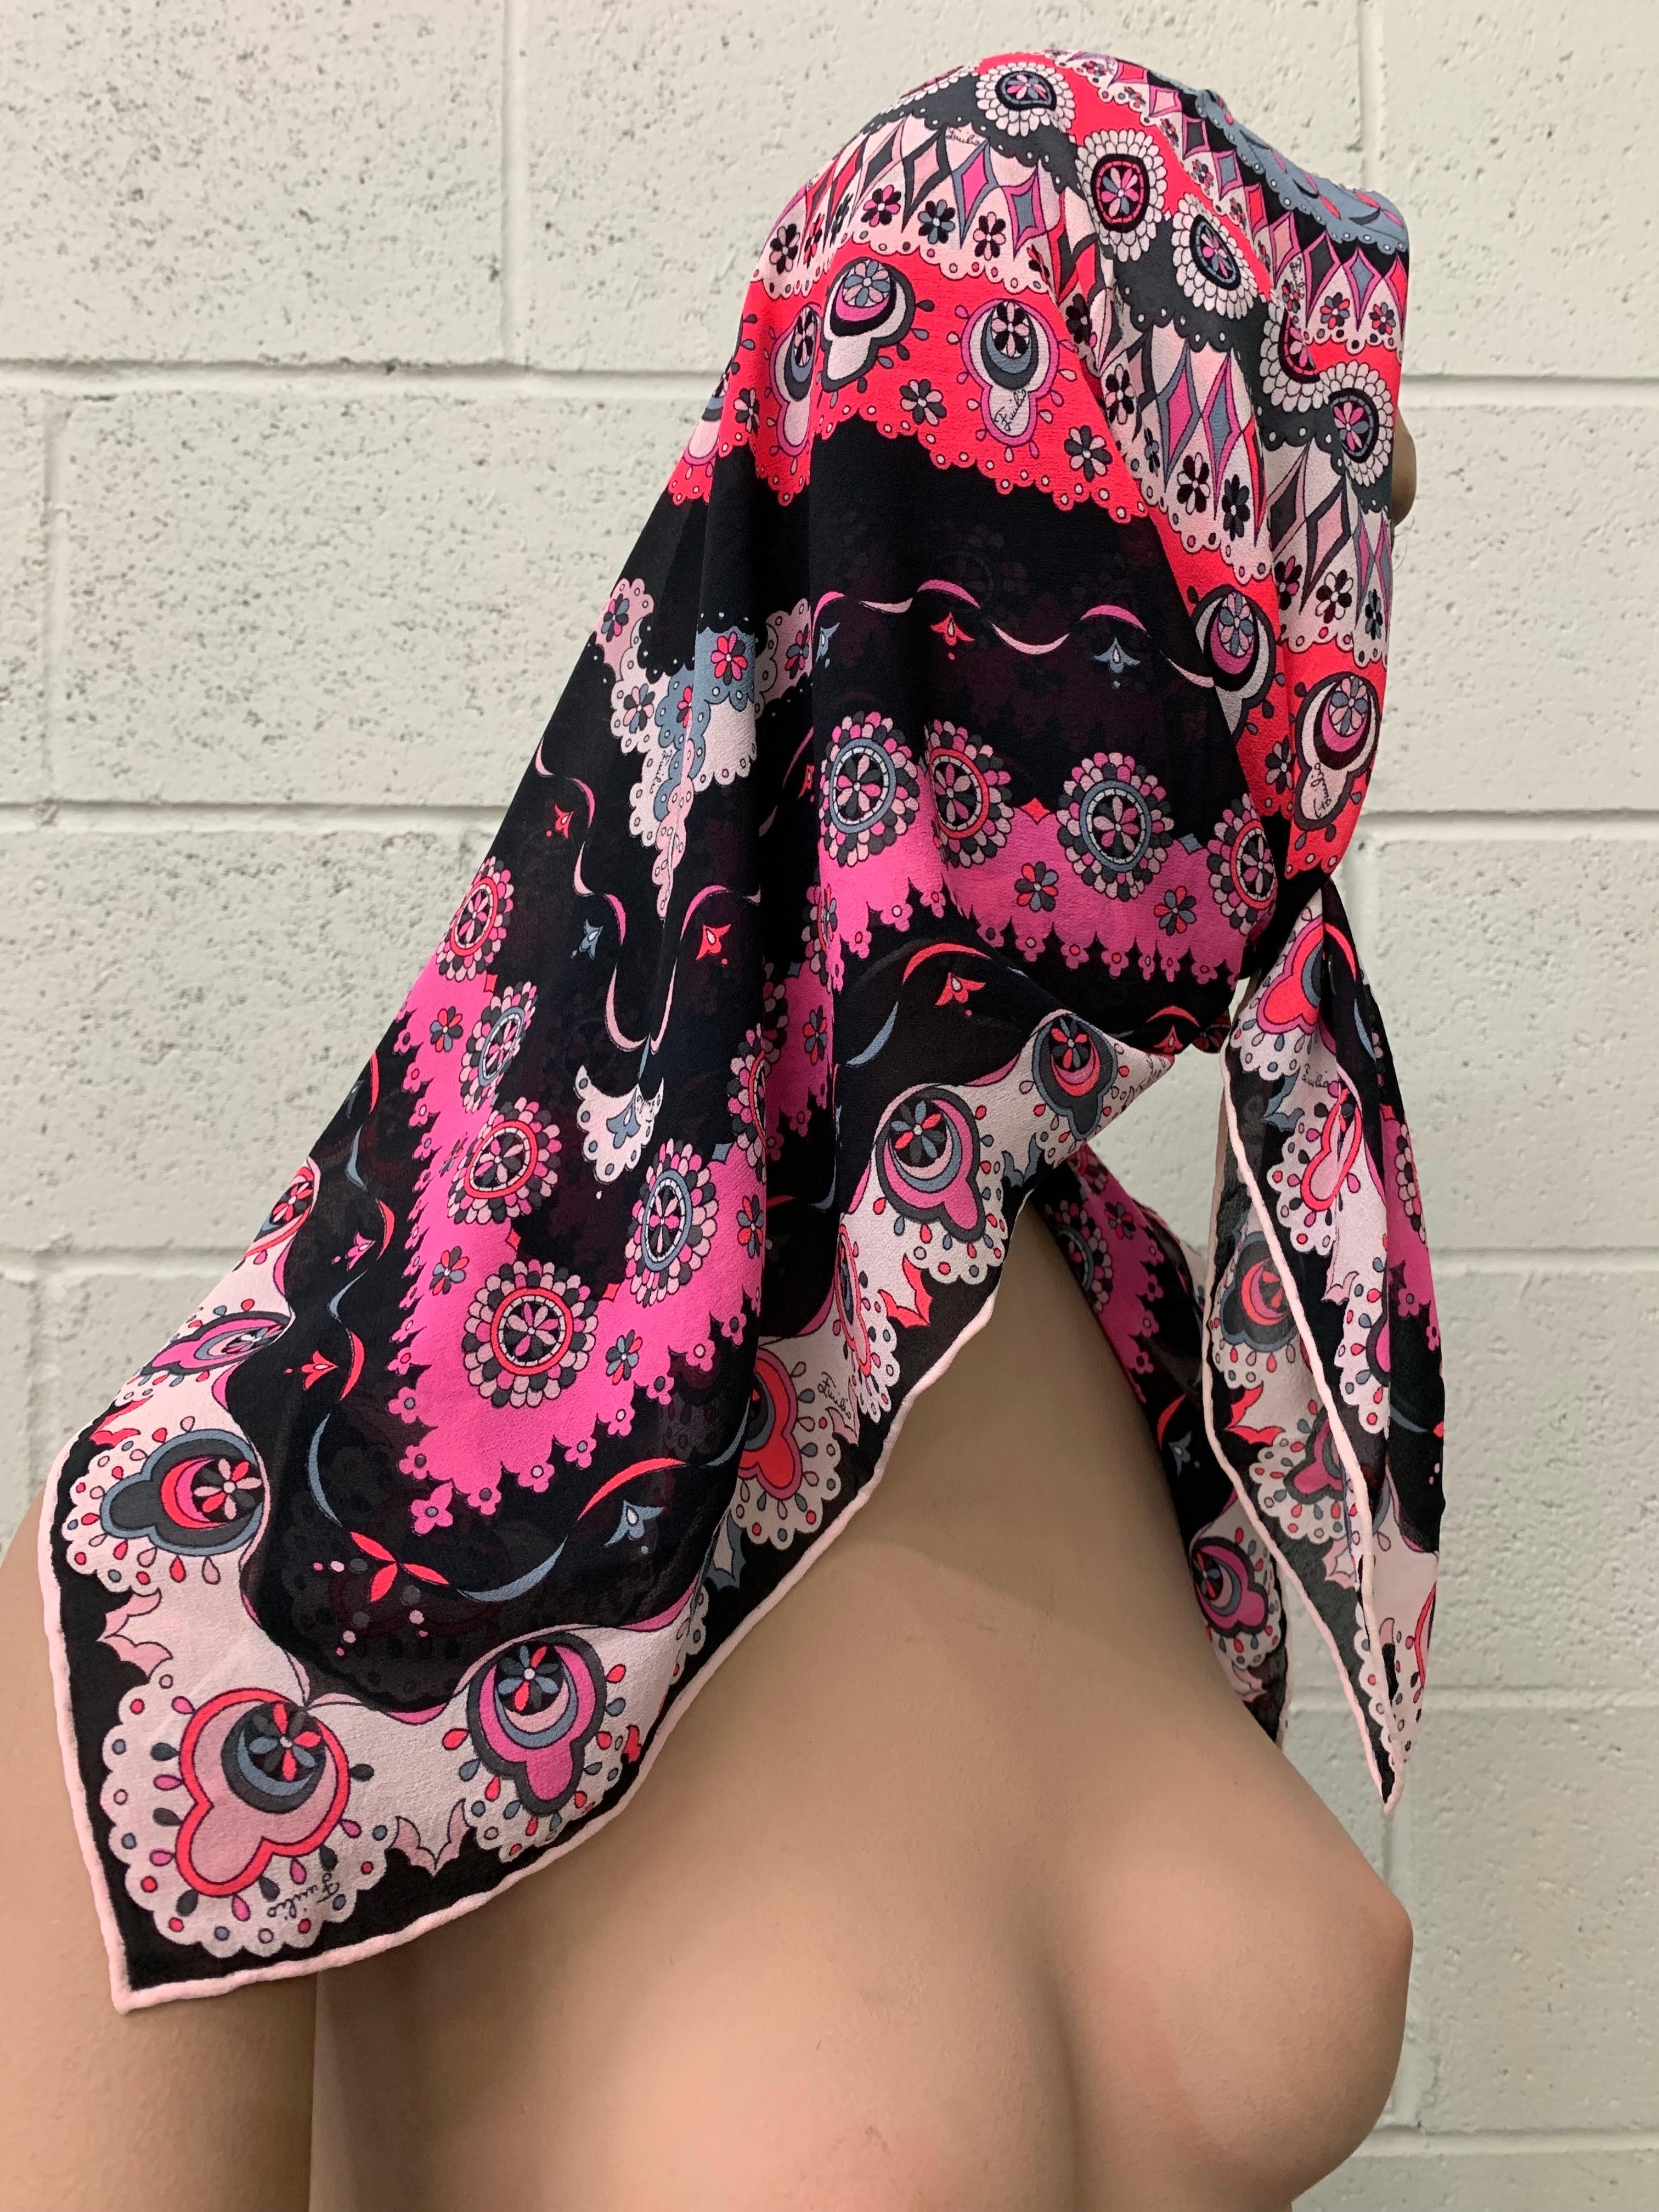 1960s Emilio Pucci Silk Chiffon Mod Medallion Print Large Square Head Scarf In Excellent Condition For Sale In Gresham, OR